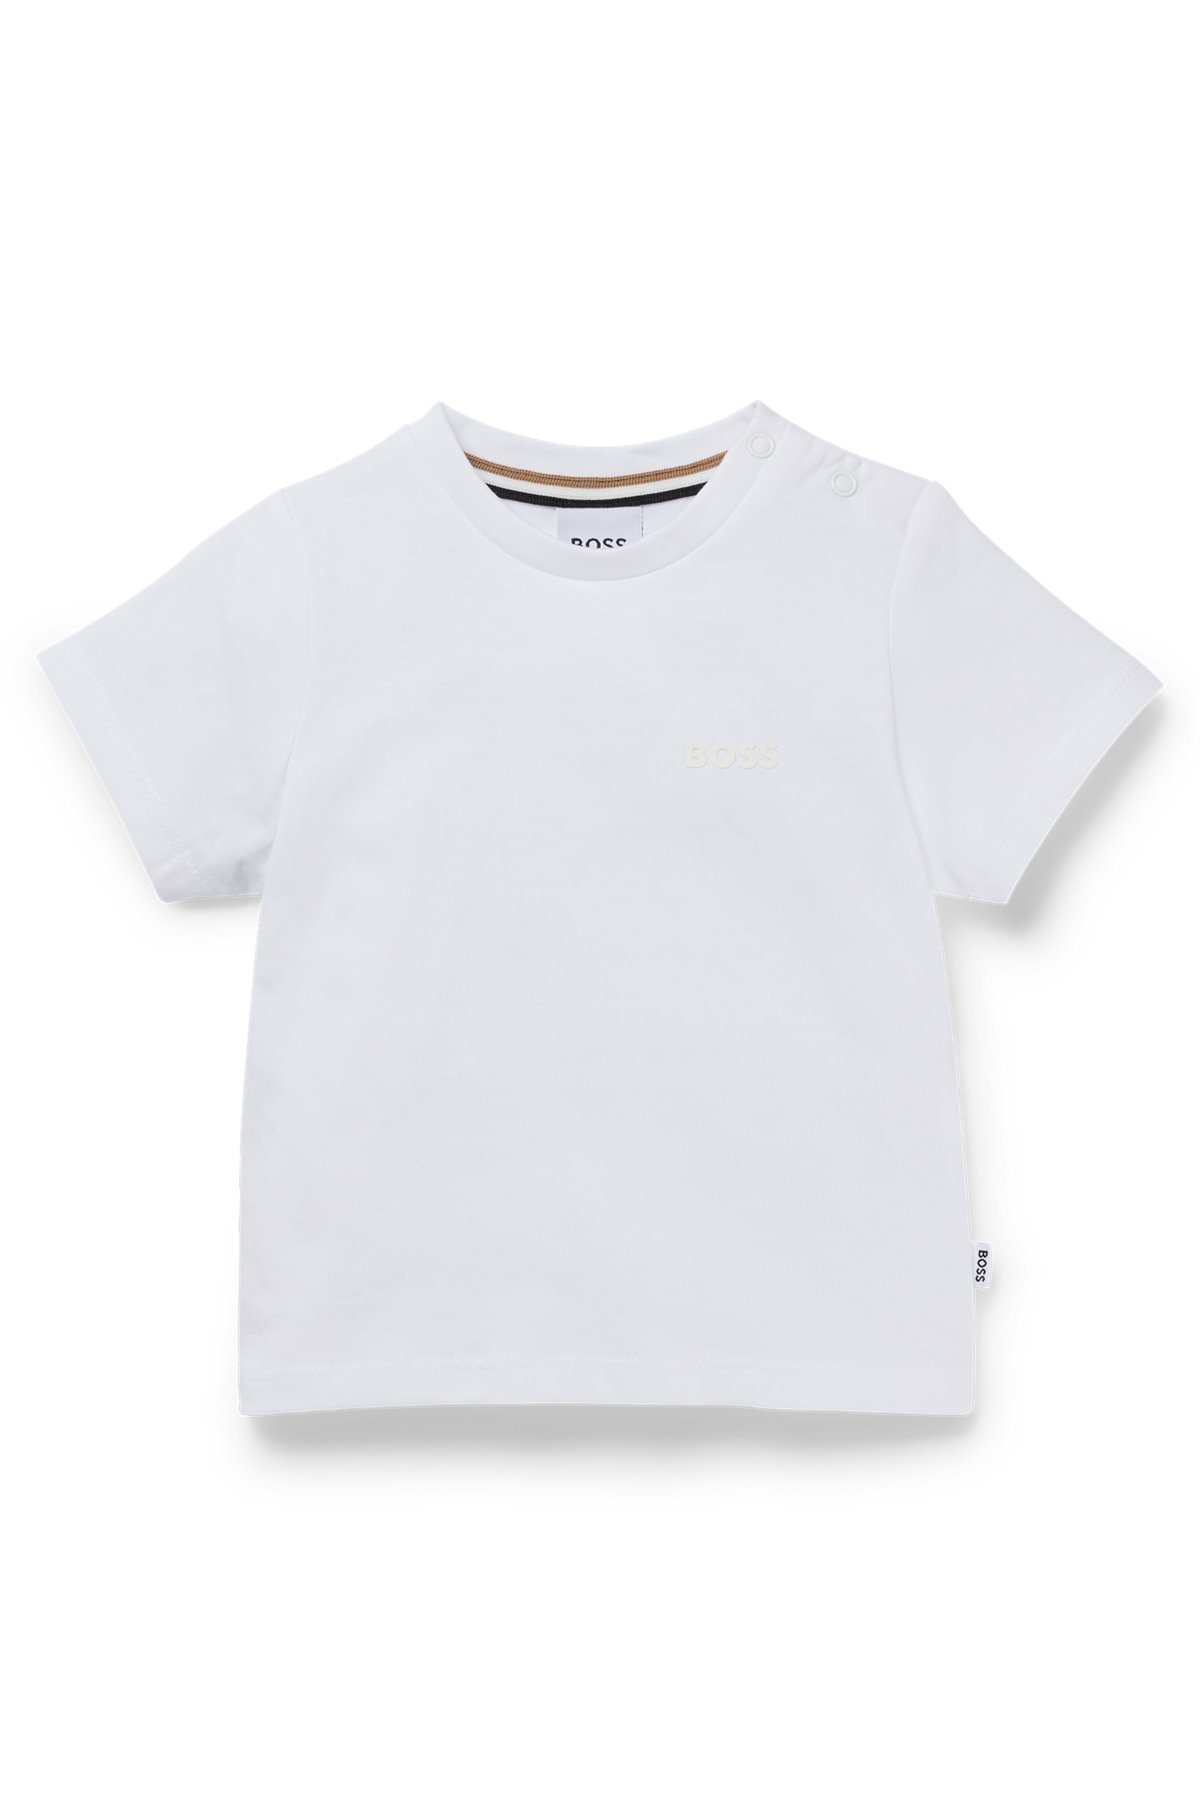 Kids' T-shirt in cotton jersey with logo print, White